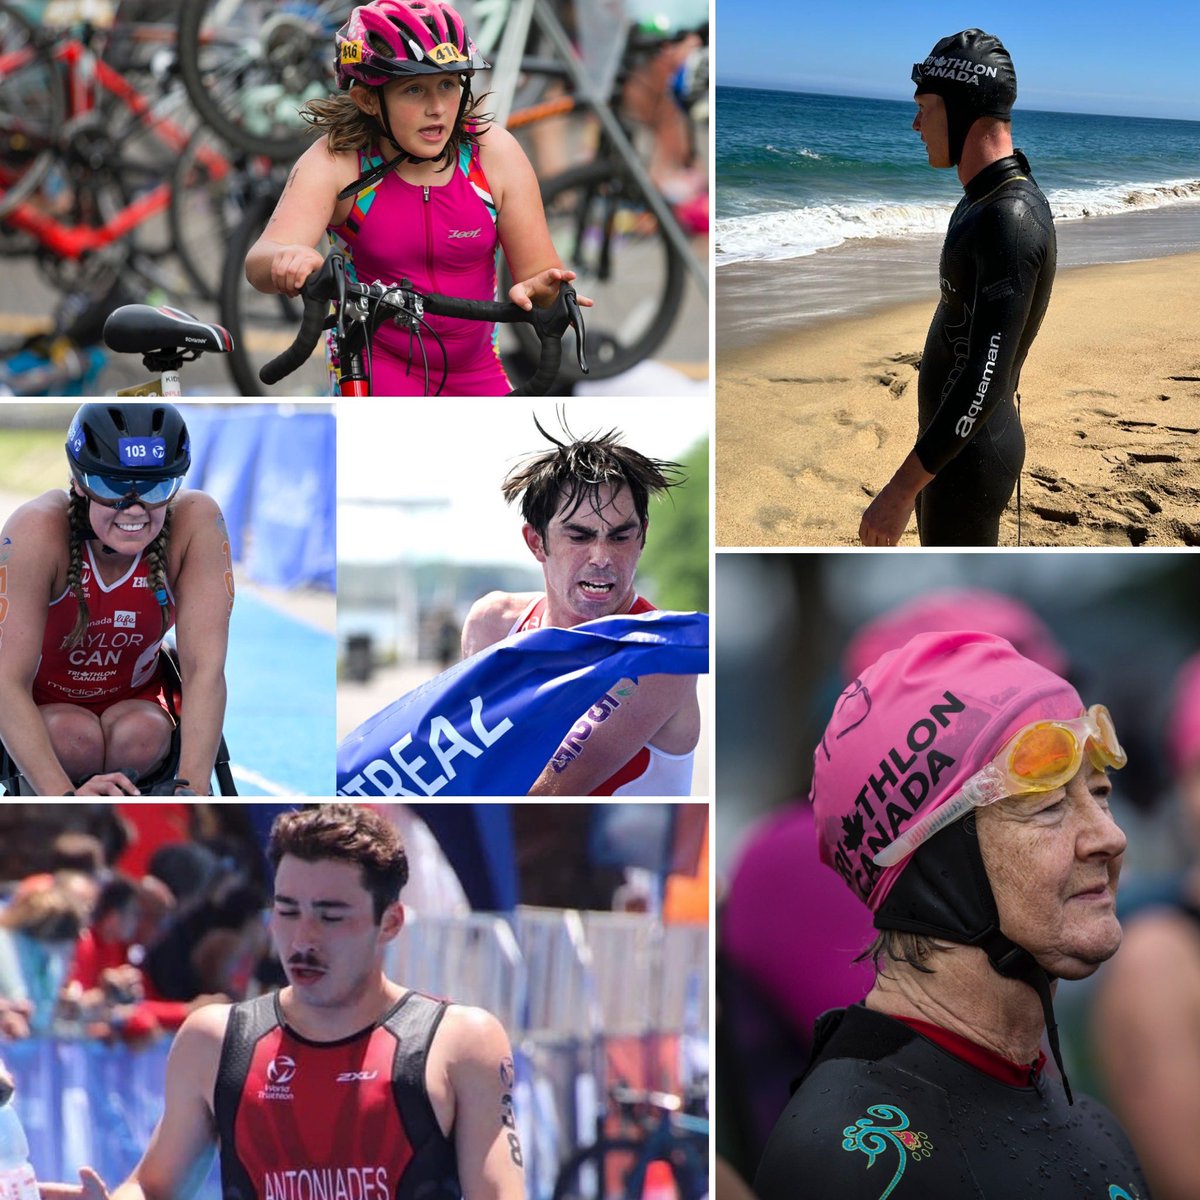 Triathlon Canada is driven to make positive changes to develop a community and system that is safe, inclusive, and barrier-free. To help achieve that goal, we also need a system that is appropriately resourced.Details 👇 olympic.ca/press/canadian… @CQualtro @cafreeland